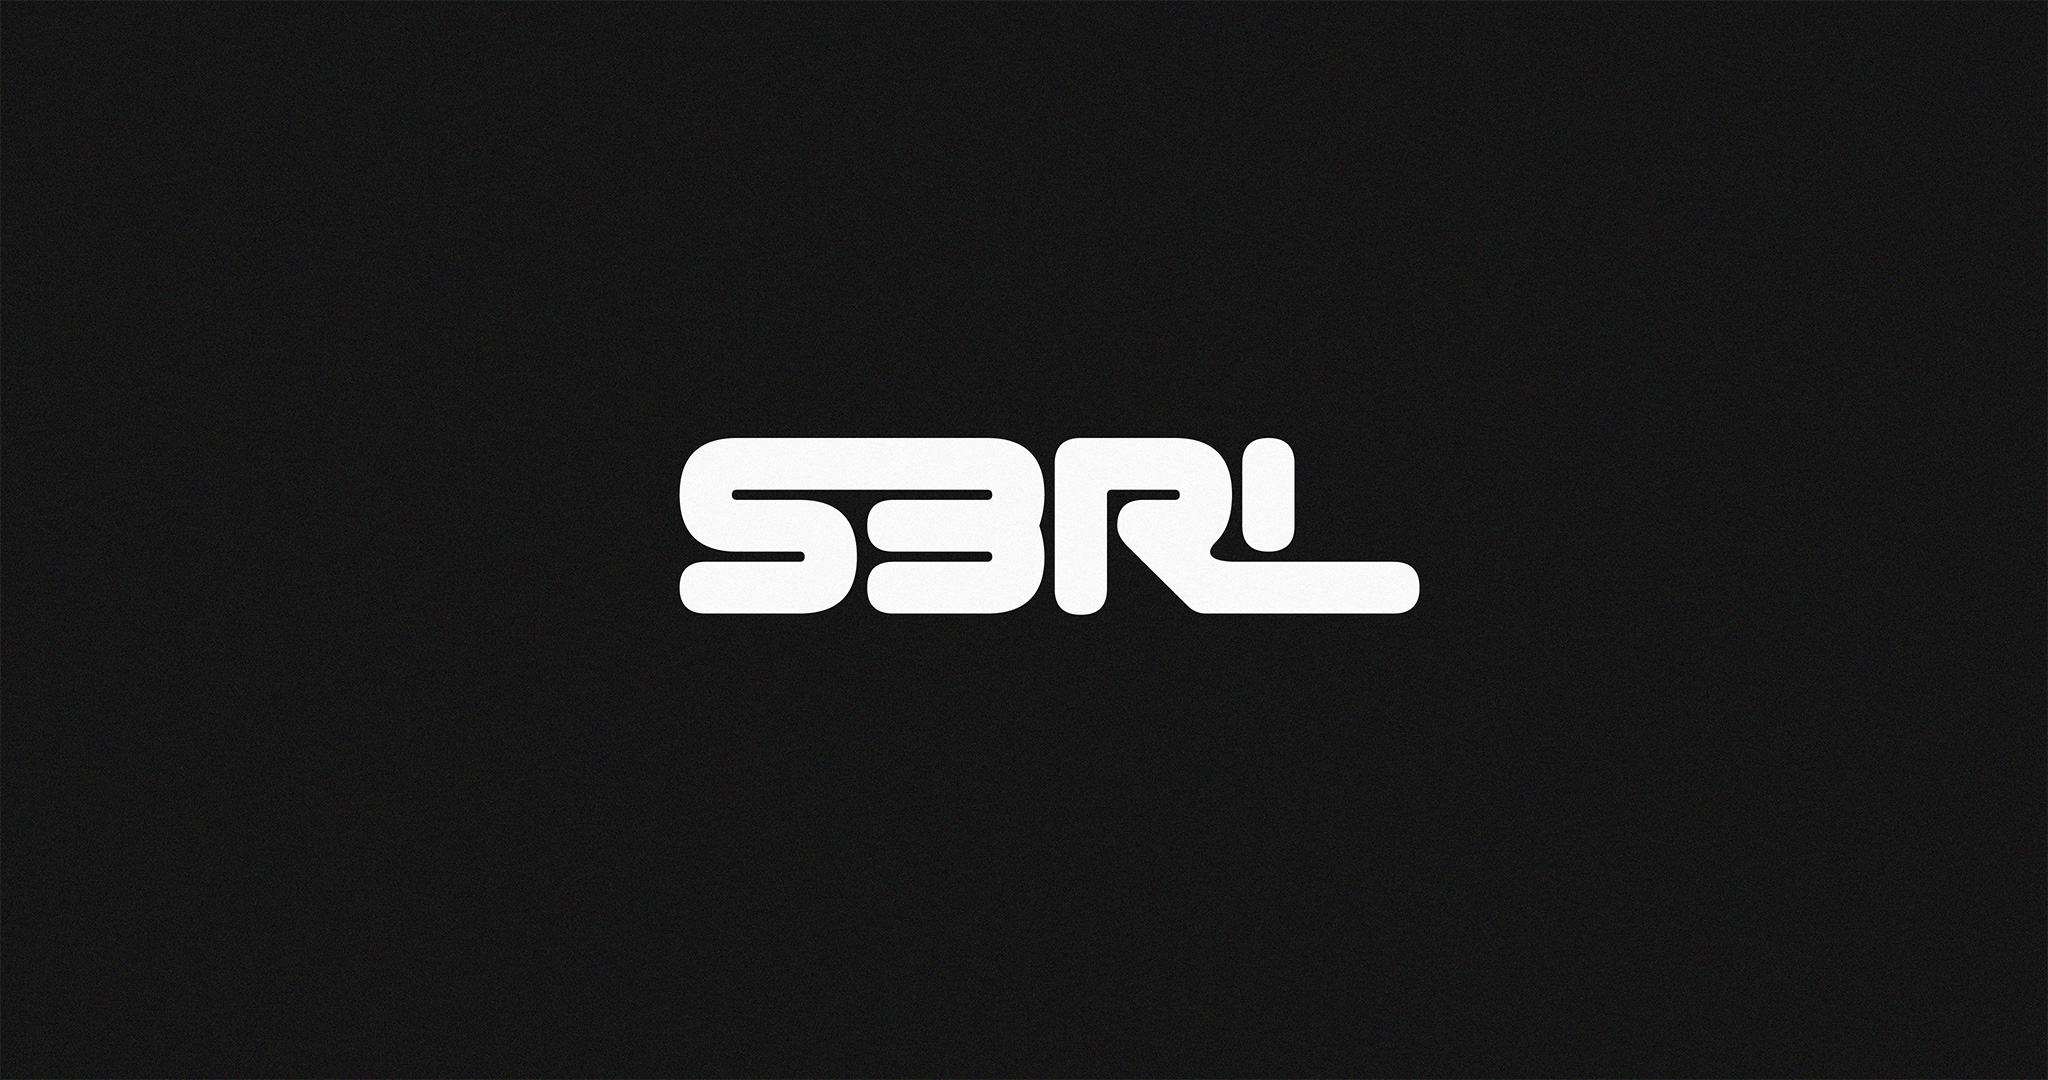 S3RL logotype in white color against a black background.